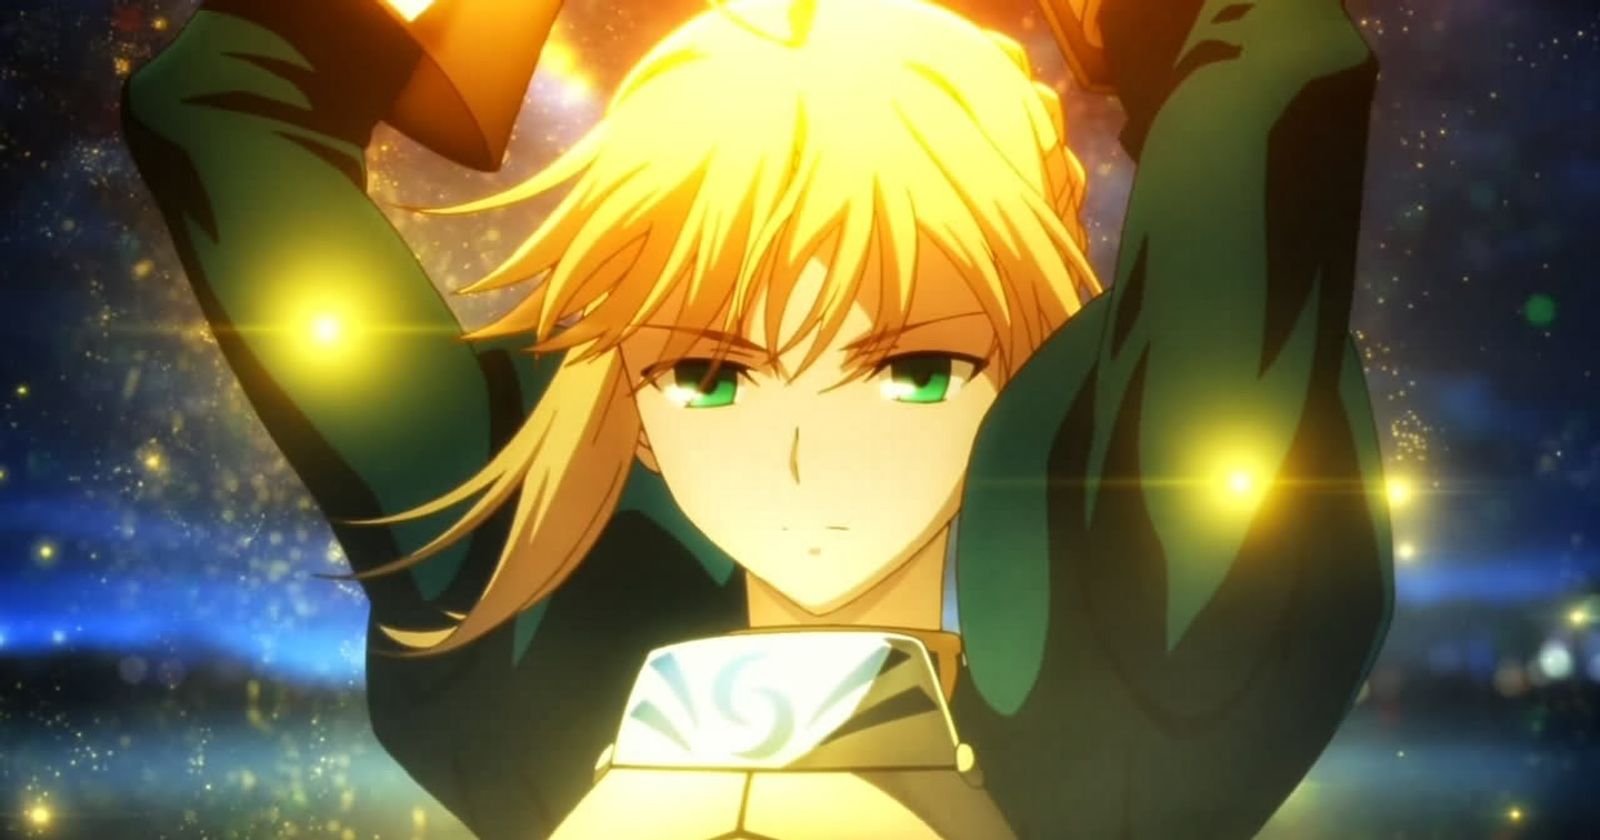 How To Watch The Complete 'Fate' Anime Series In Chronological Order